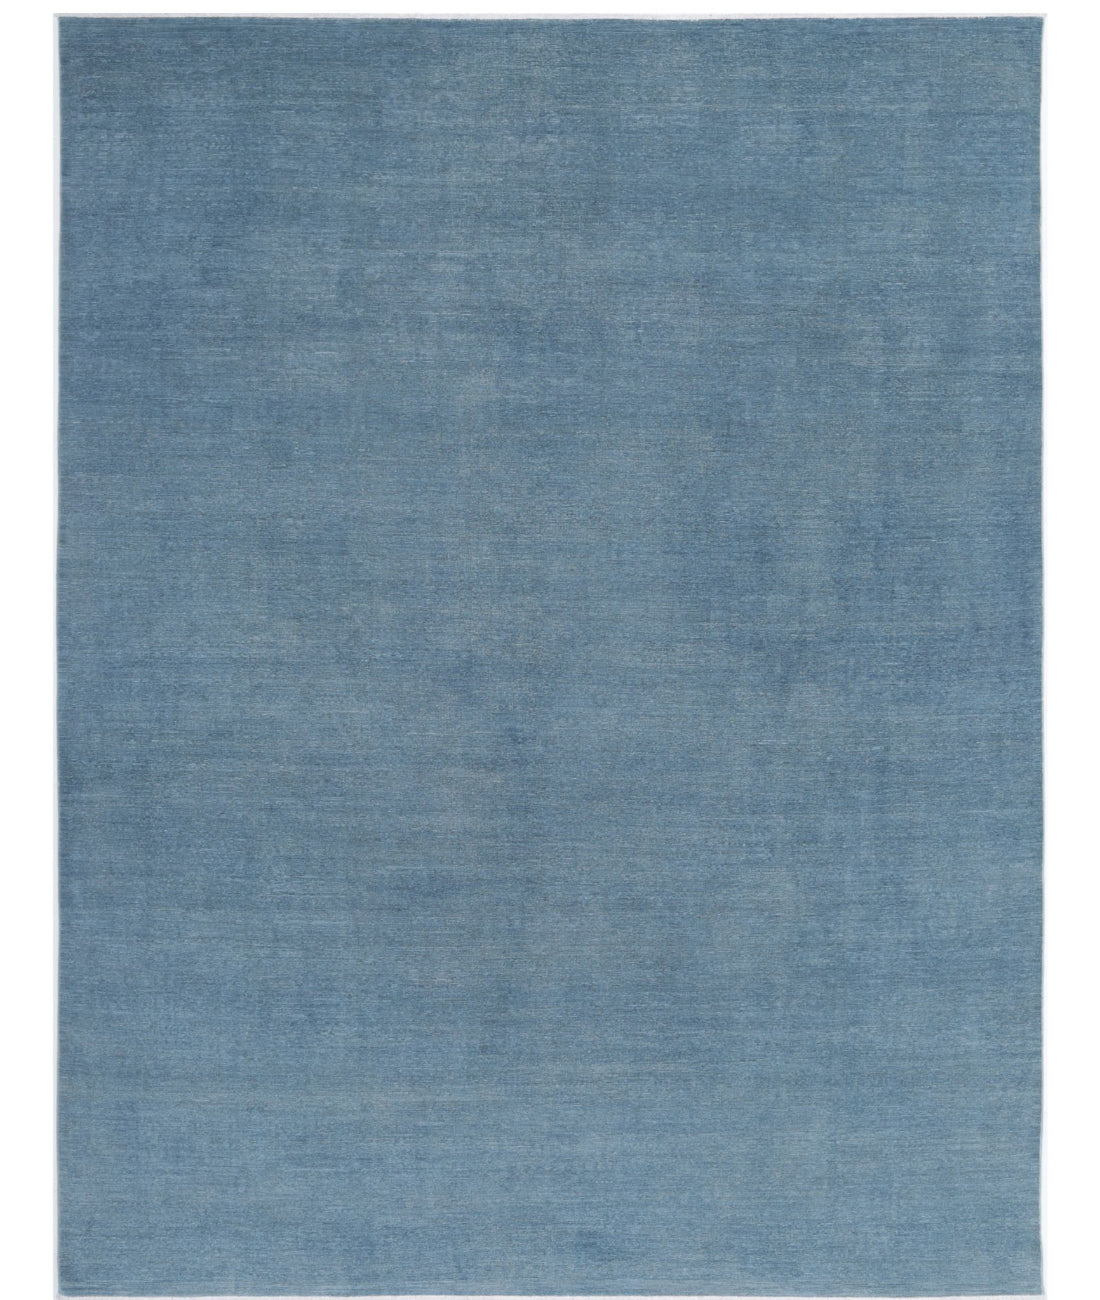 Hand Knotted Overdye Wool Rug - 8'11'' x 11'9'' 8'11'' x 11'9'' (268 X 353) / Blue / Blue